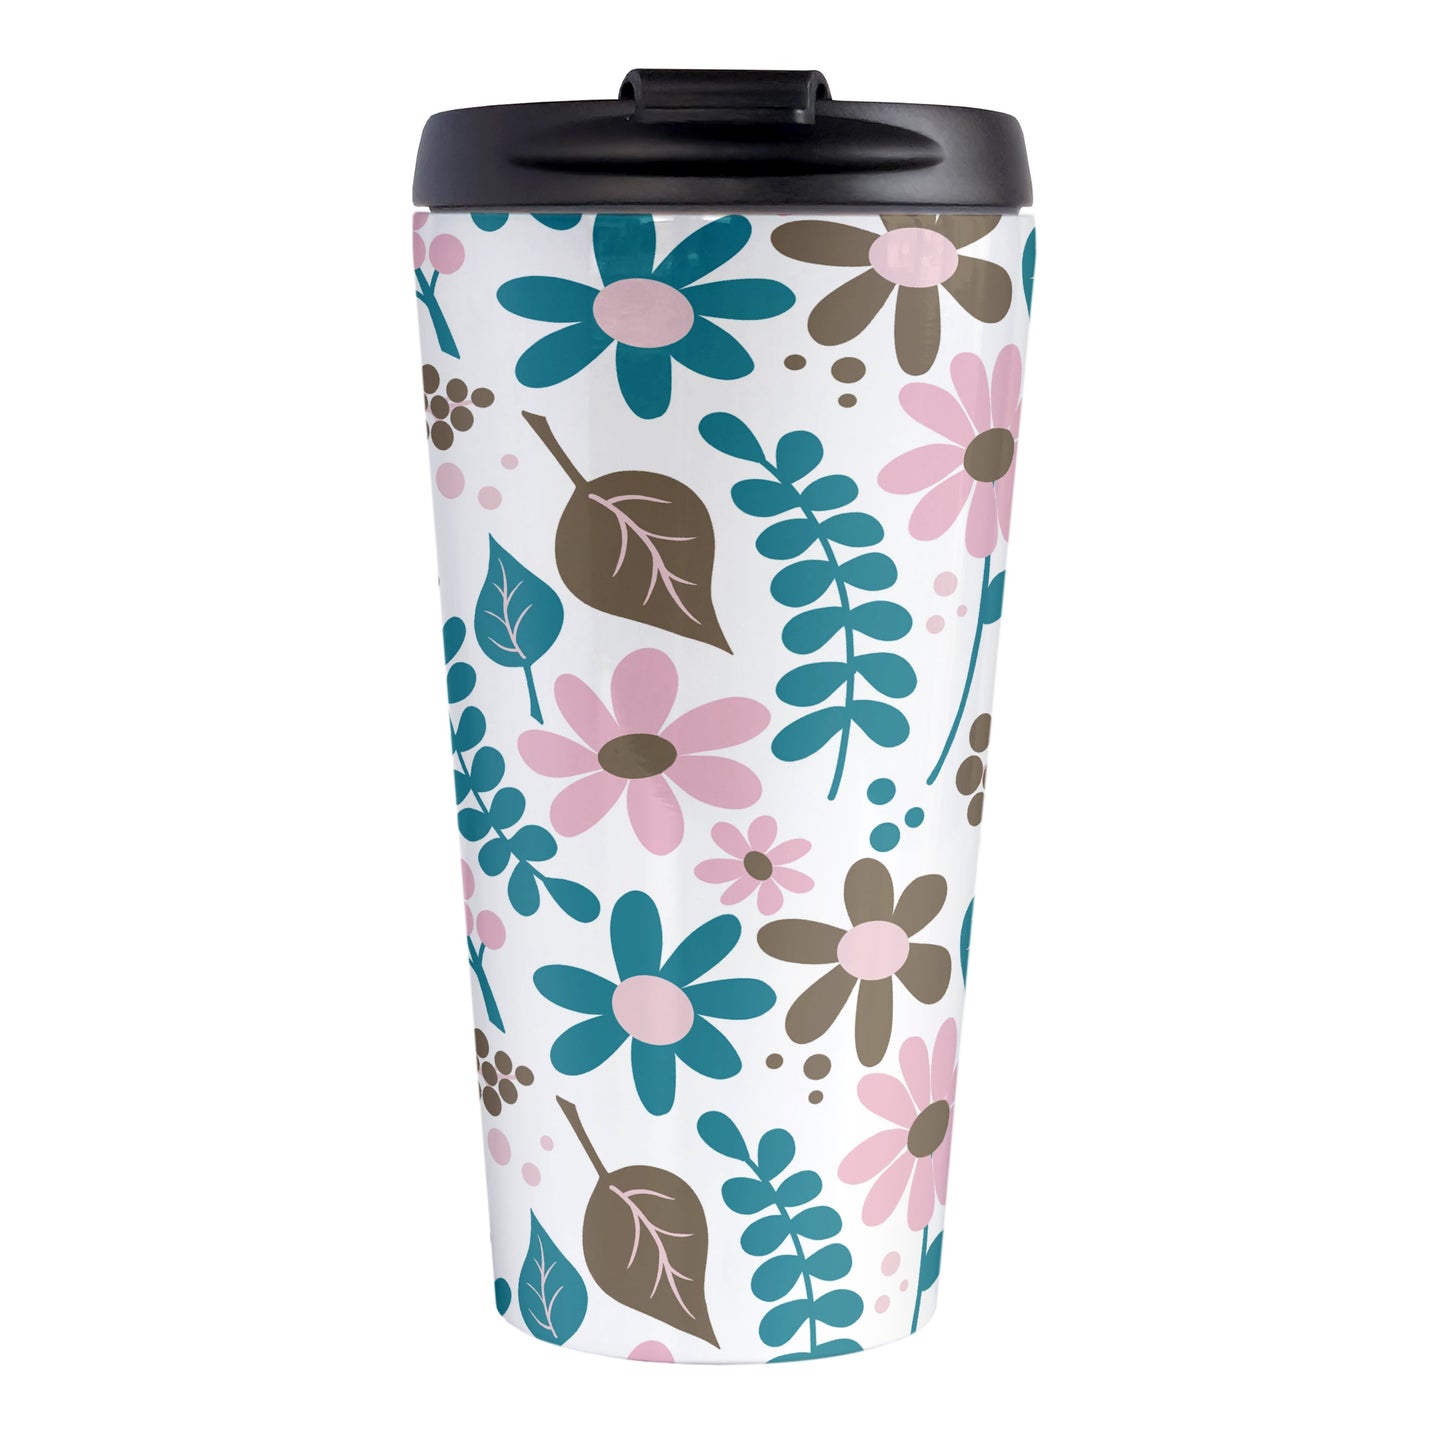 Pink Turquoise Brown Floral Pattern Travel Mug (15oz, stainless steel insulated) at Amy's Coffee Mugs